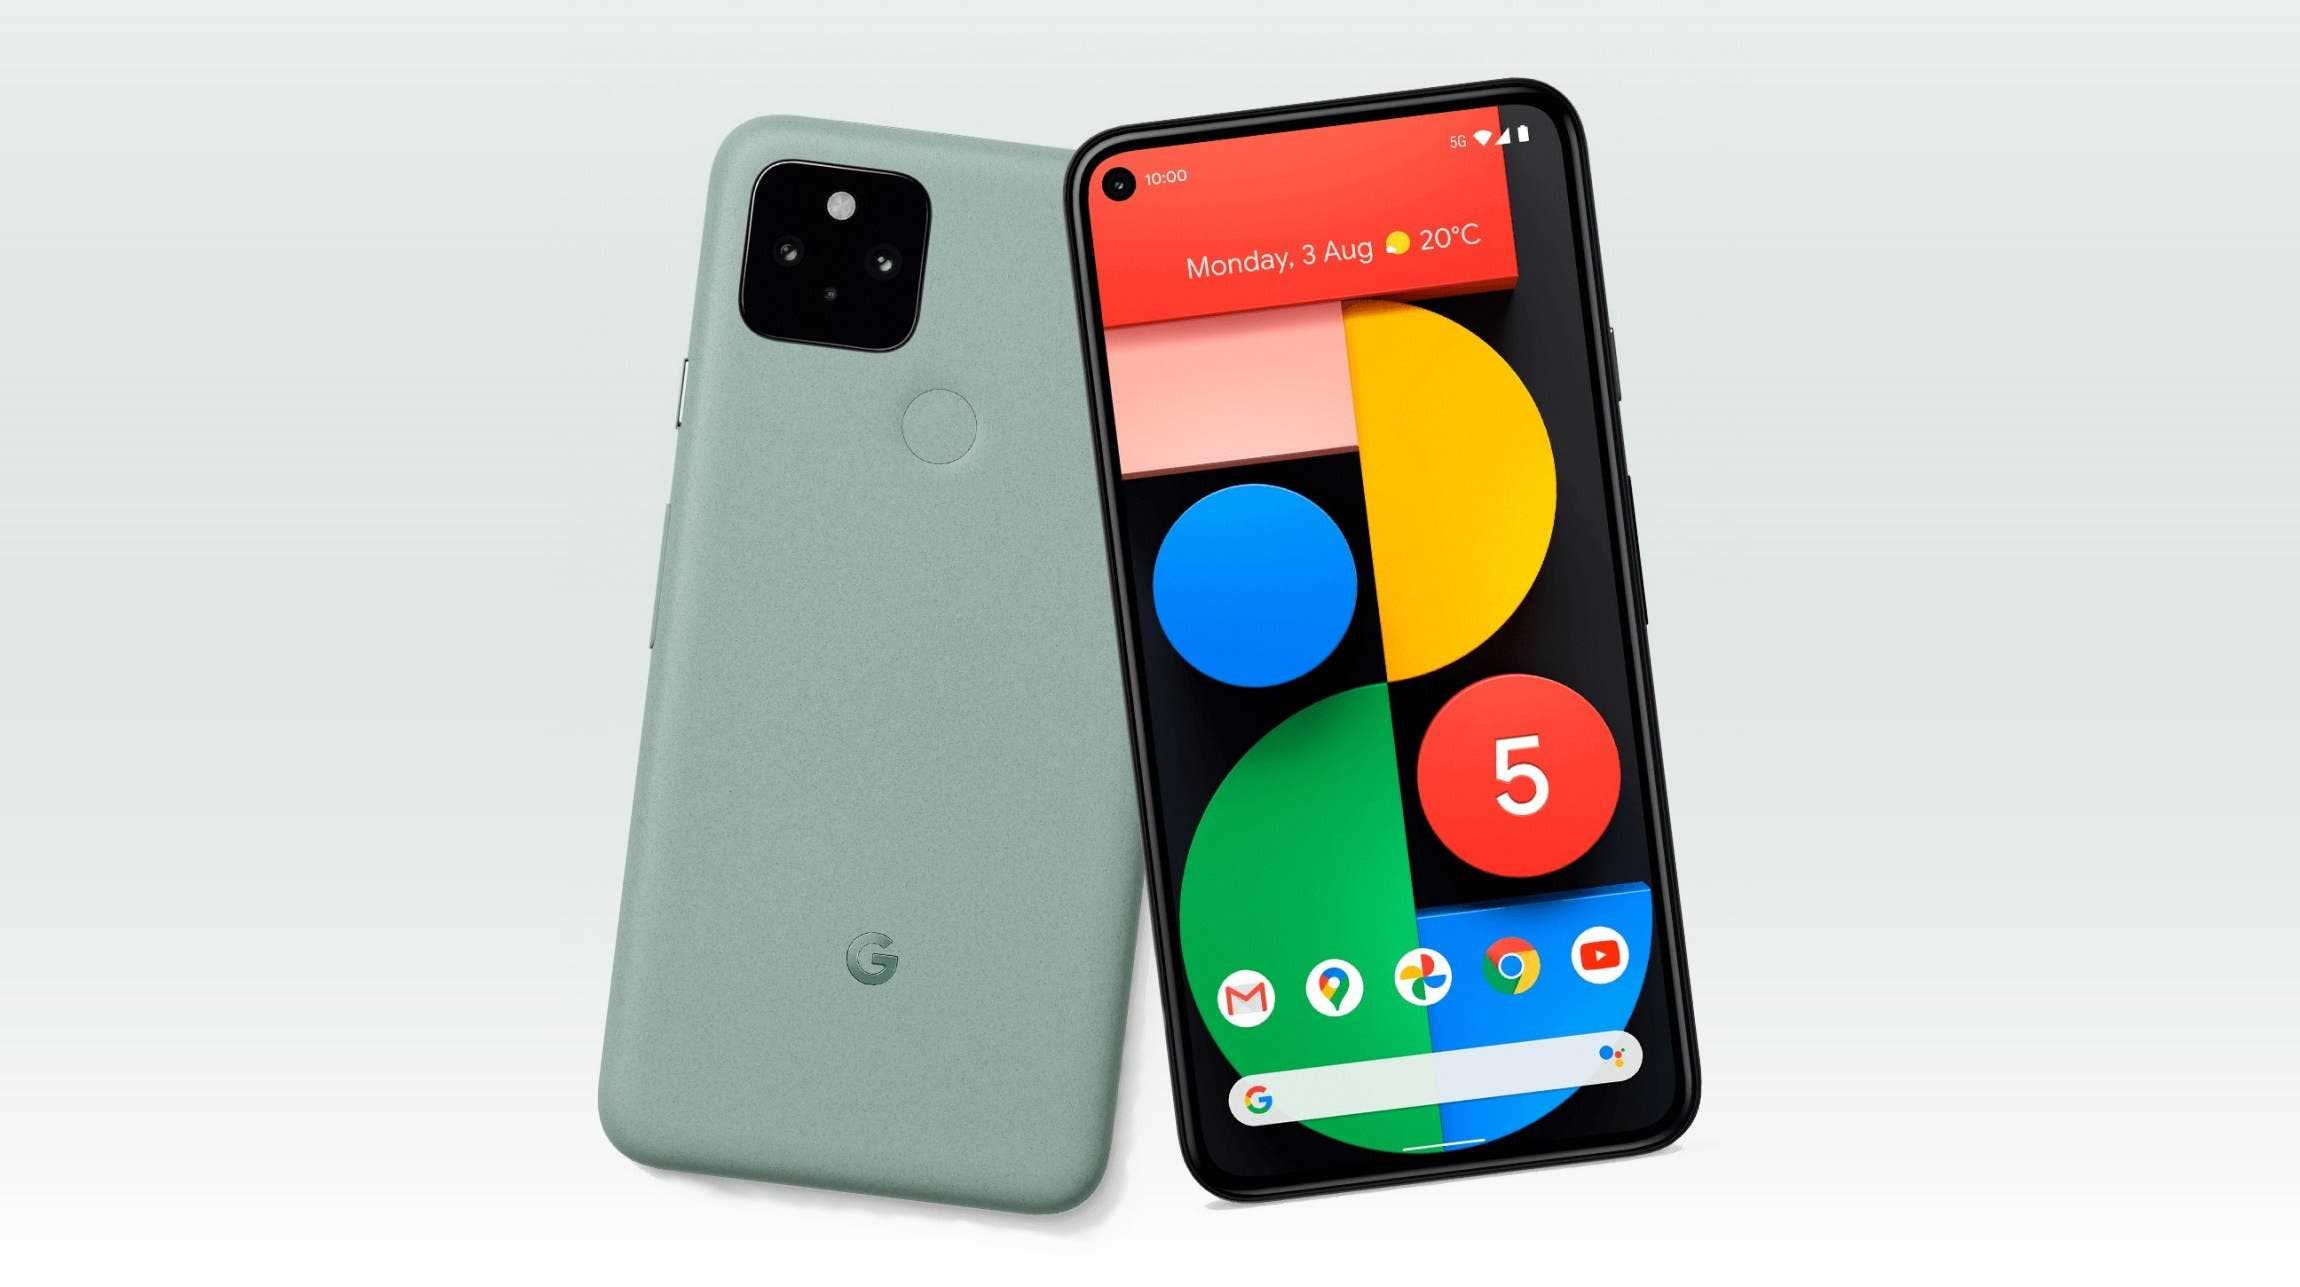 Google Pixel 5 launch tipped for October 15, Pixel 4a 5G launch moved to  November - Gizchina.com